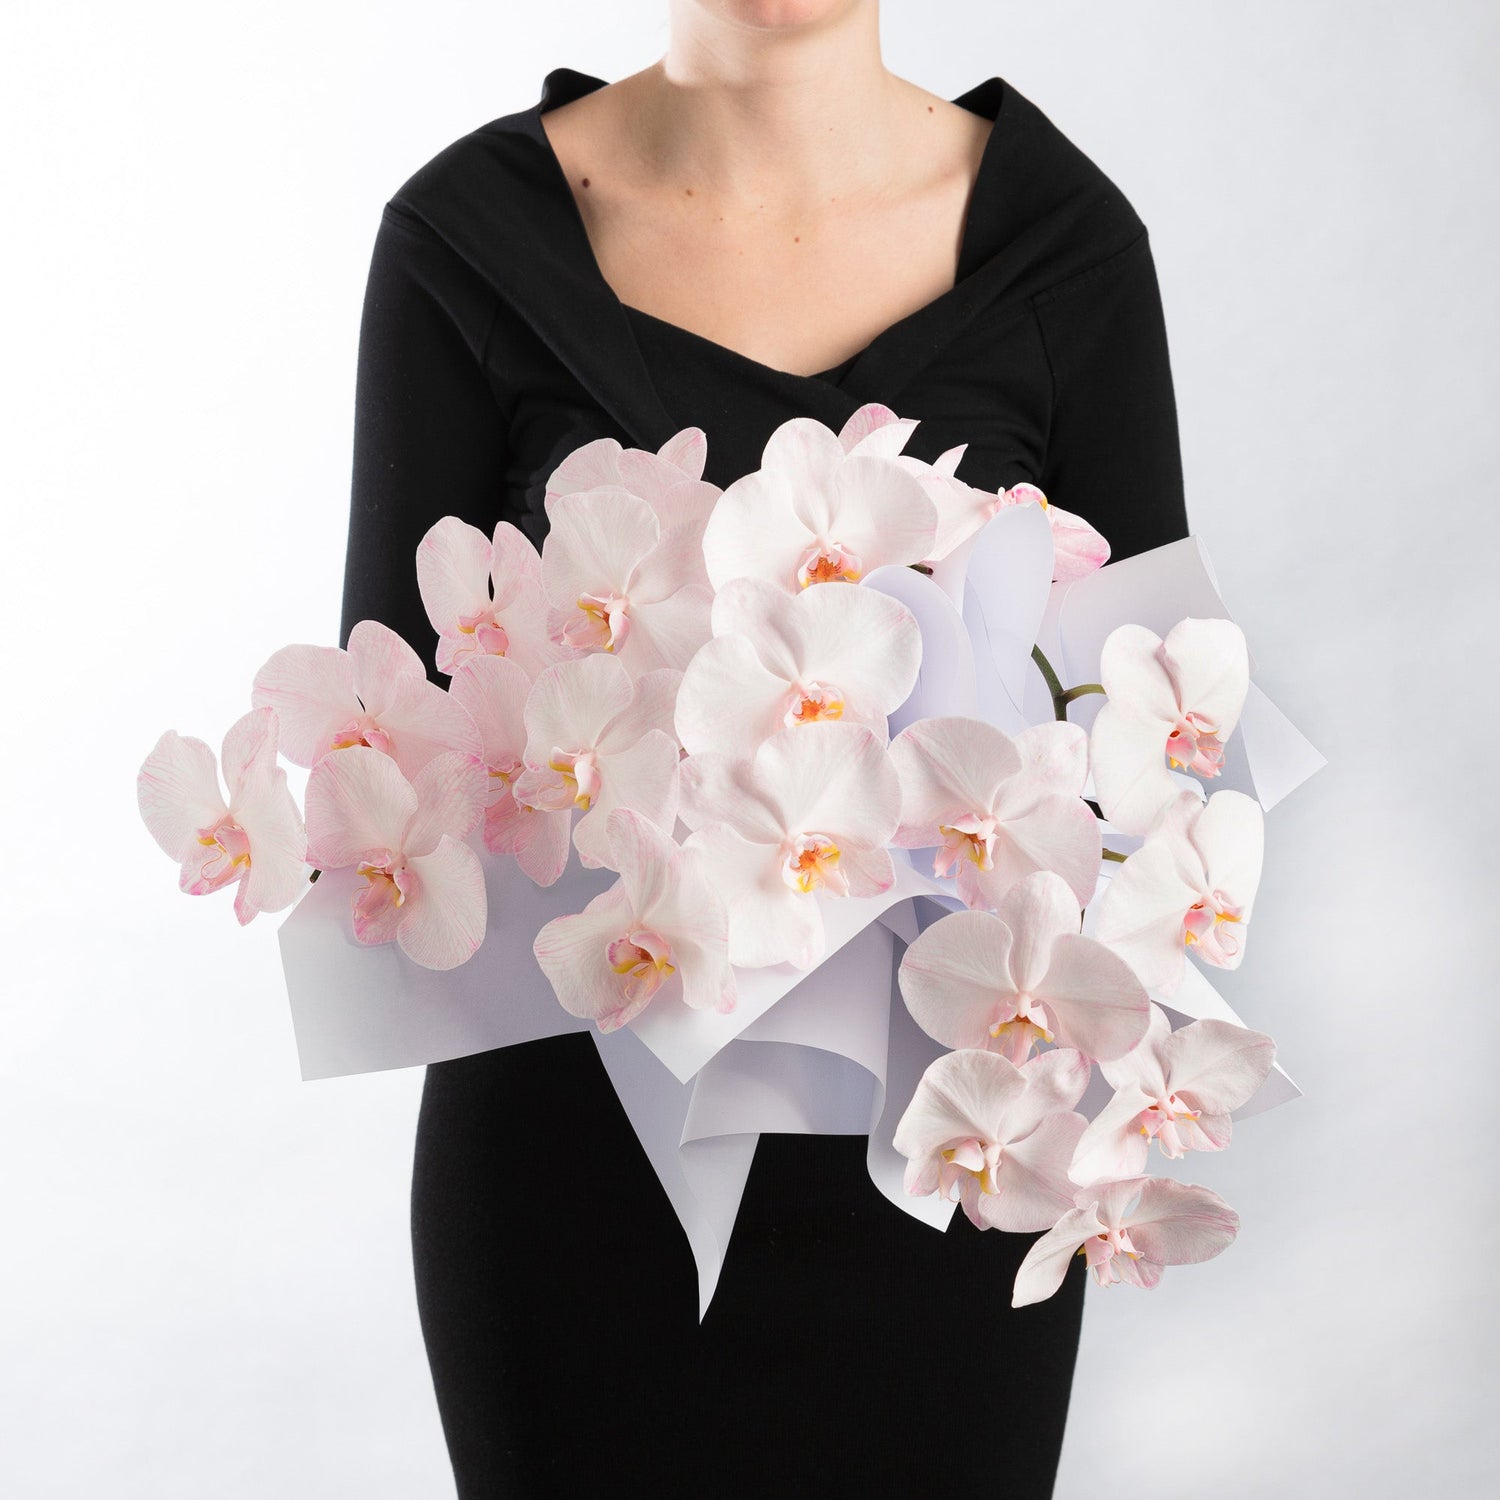 A woman earing black, holding a bouquet of soft pink phalaenopsis orchids in a bouquet.